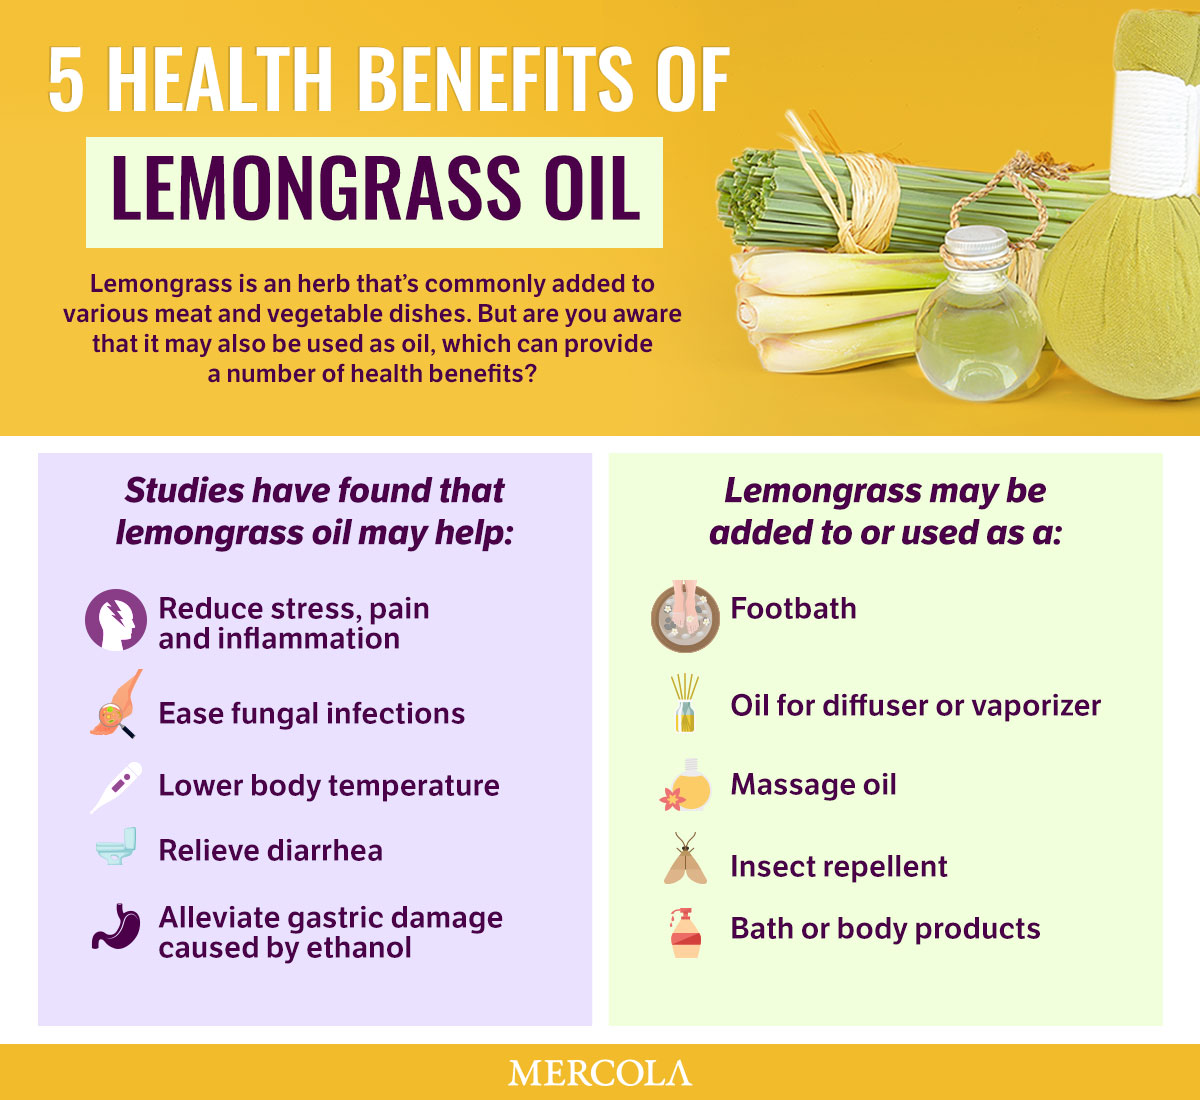 related studies about lemongrass as insect repellent